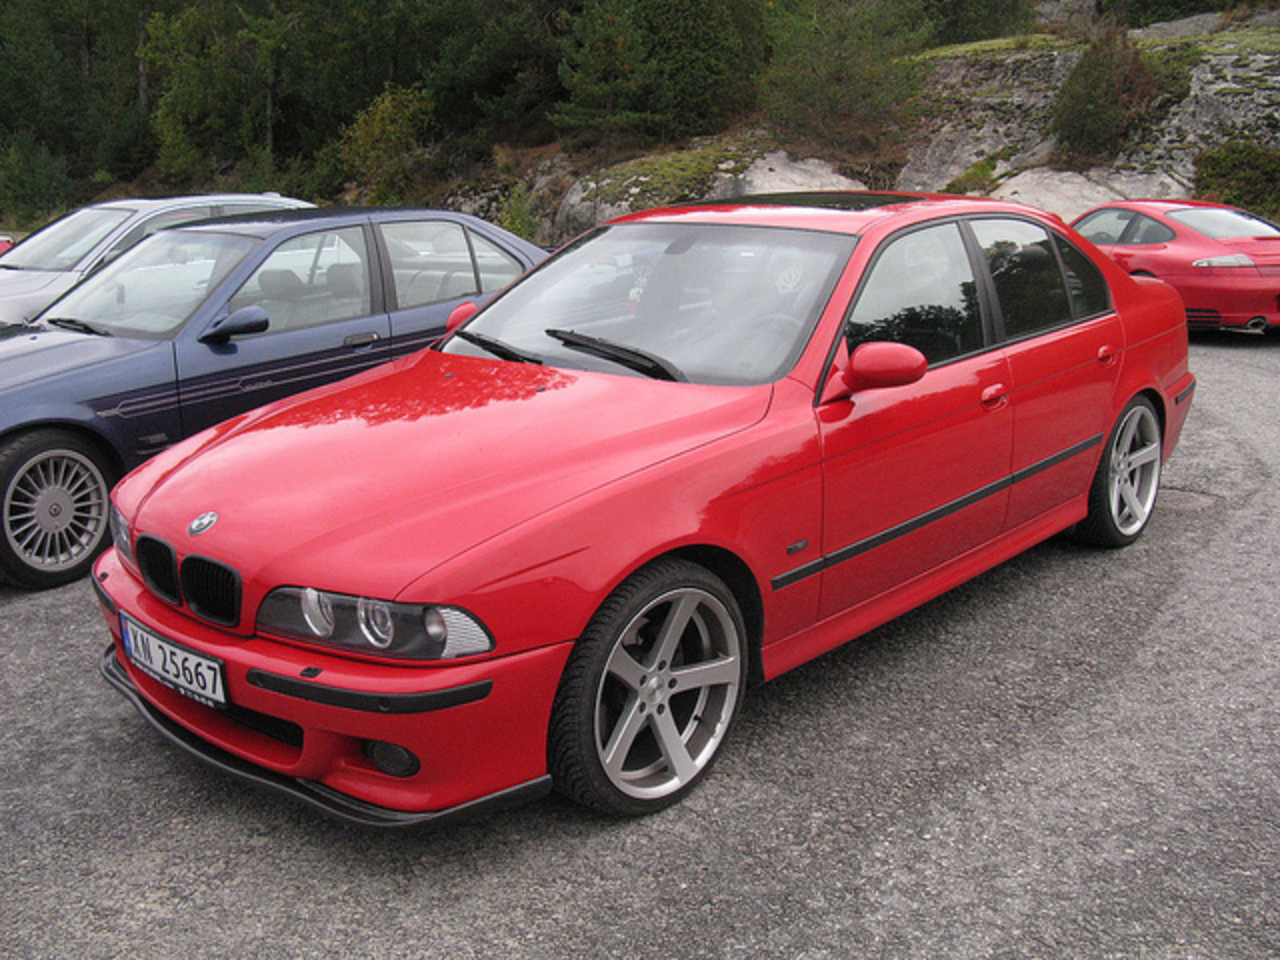 Flickr: The BMW E39 (5-series) Pool